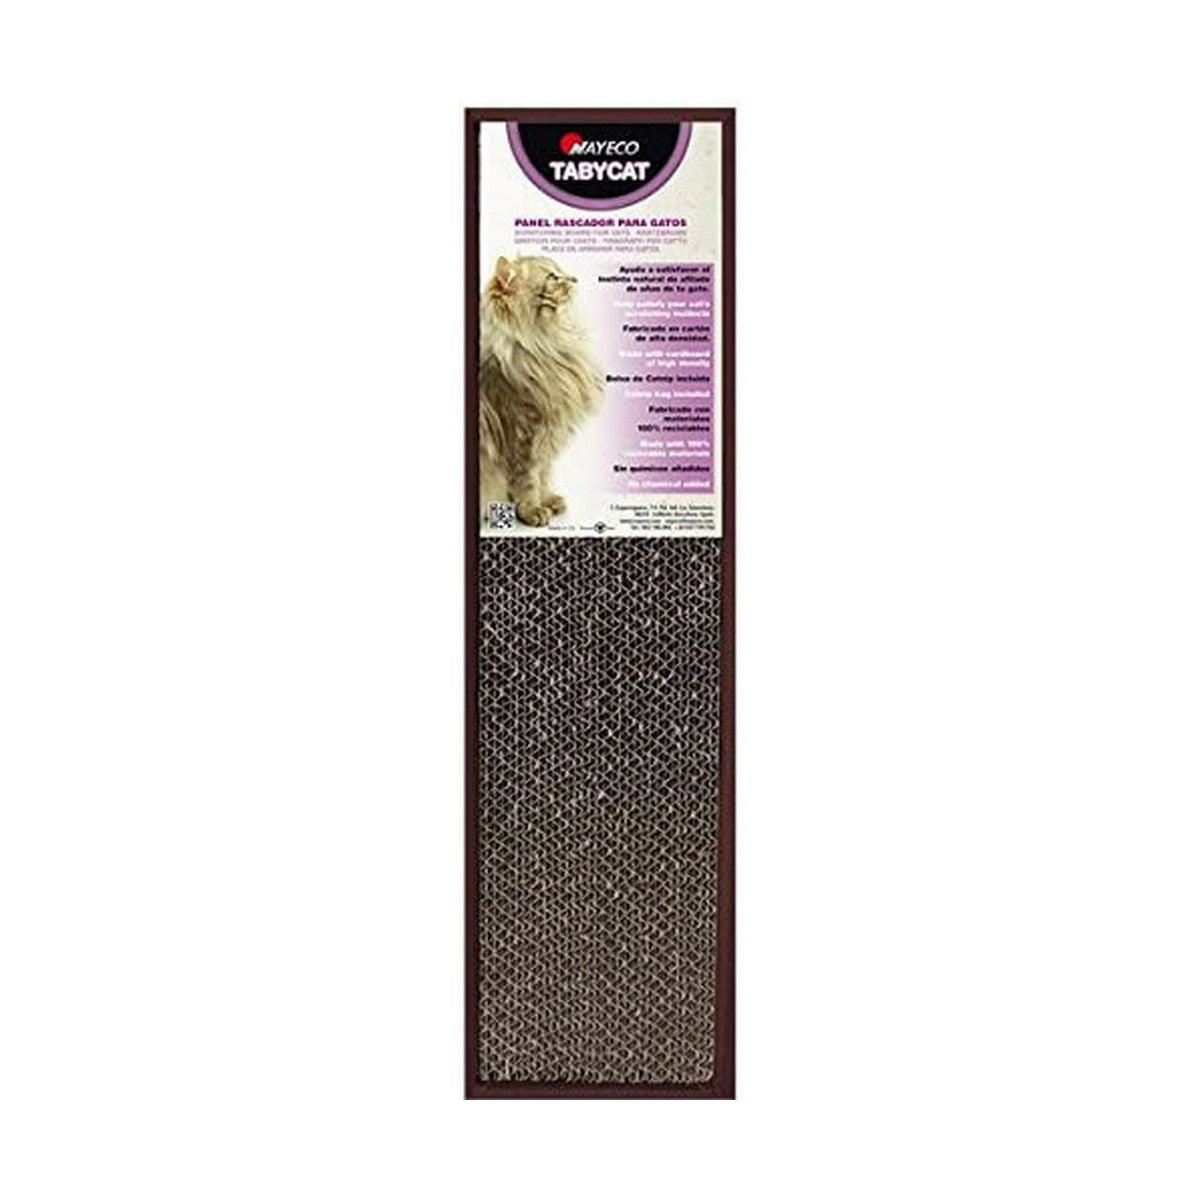 Scratching Post for Cats Nayeco TABY CAT Brown Cardboard 48 x 13 x 4 cm